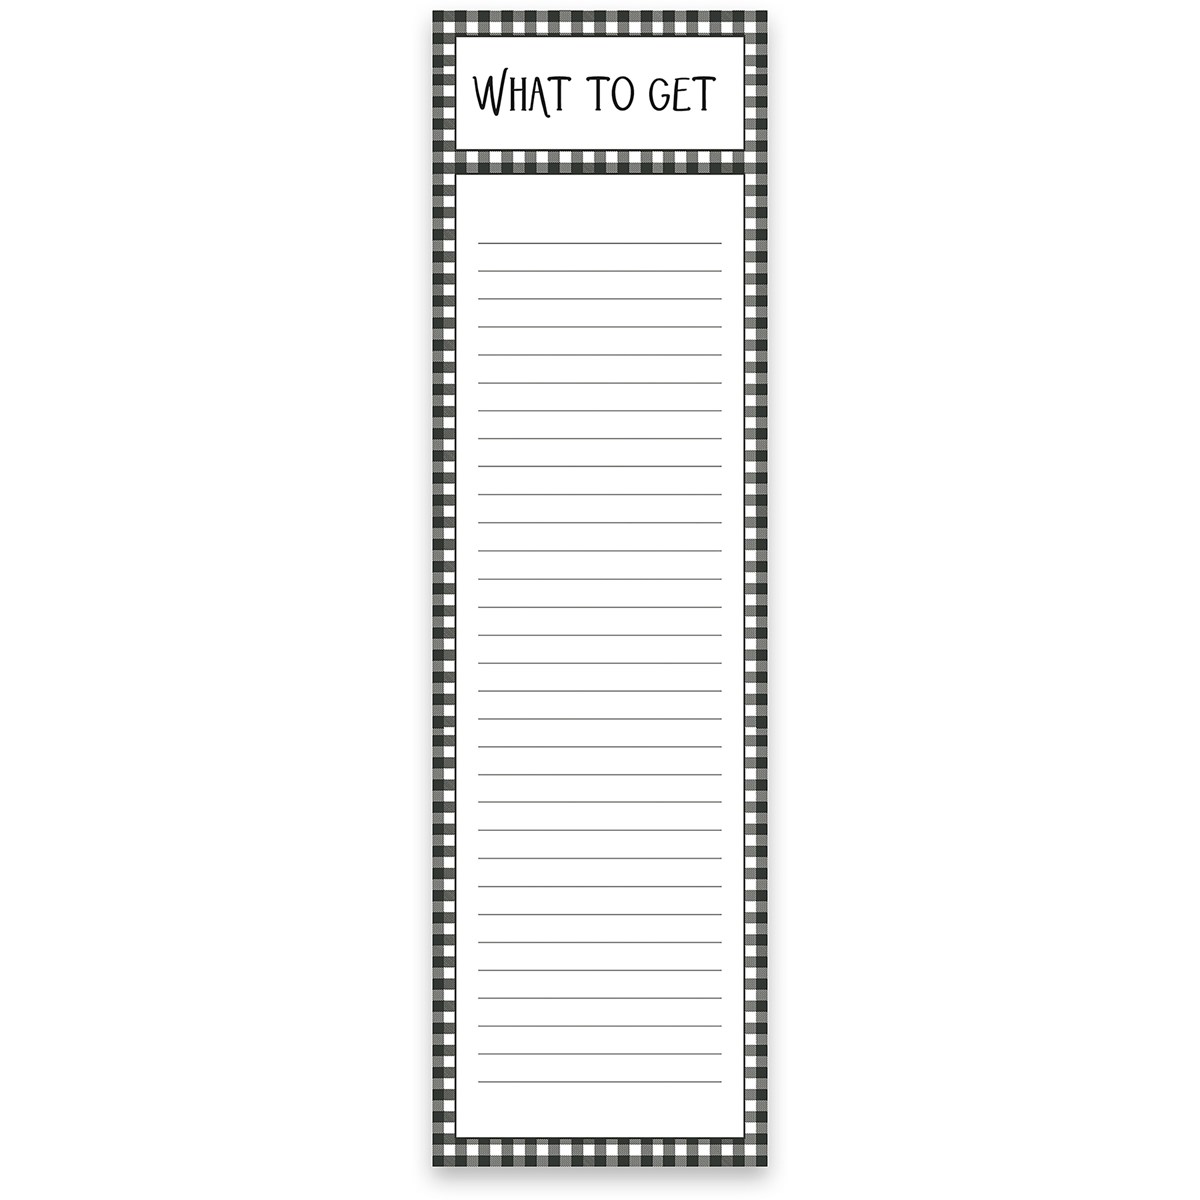 What To Get List Pad - Paper, Magnet